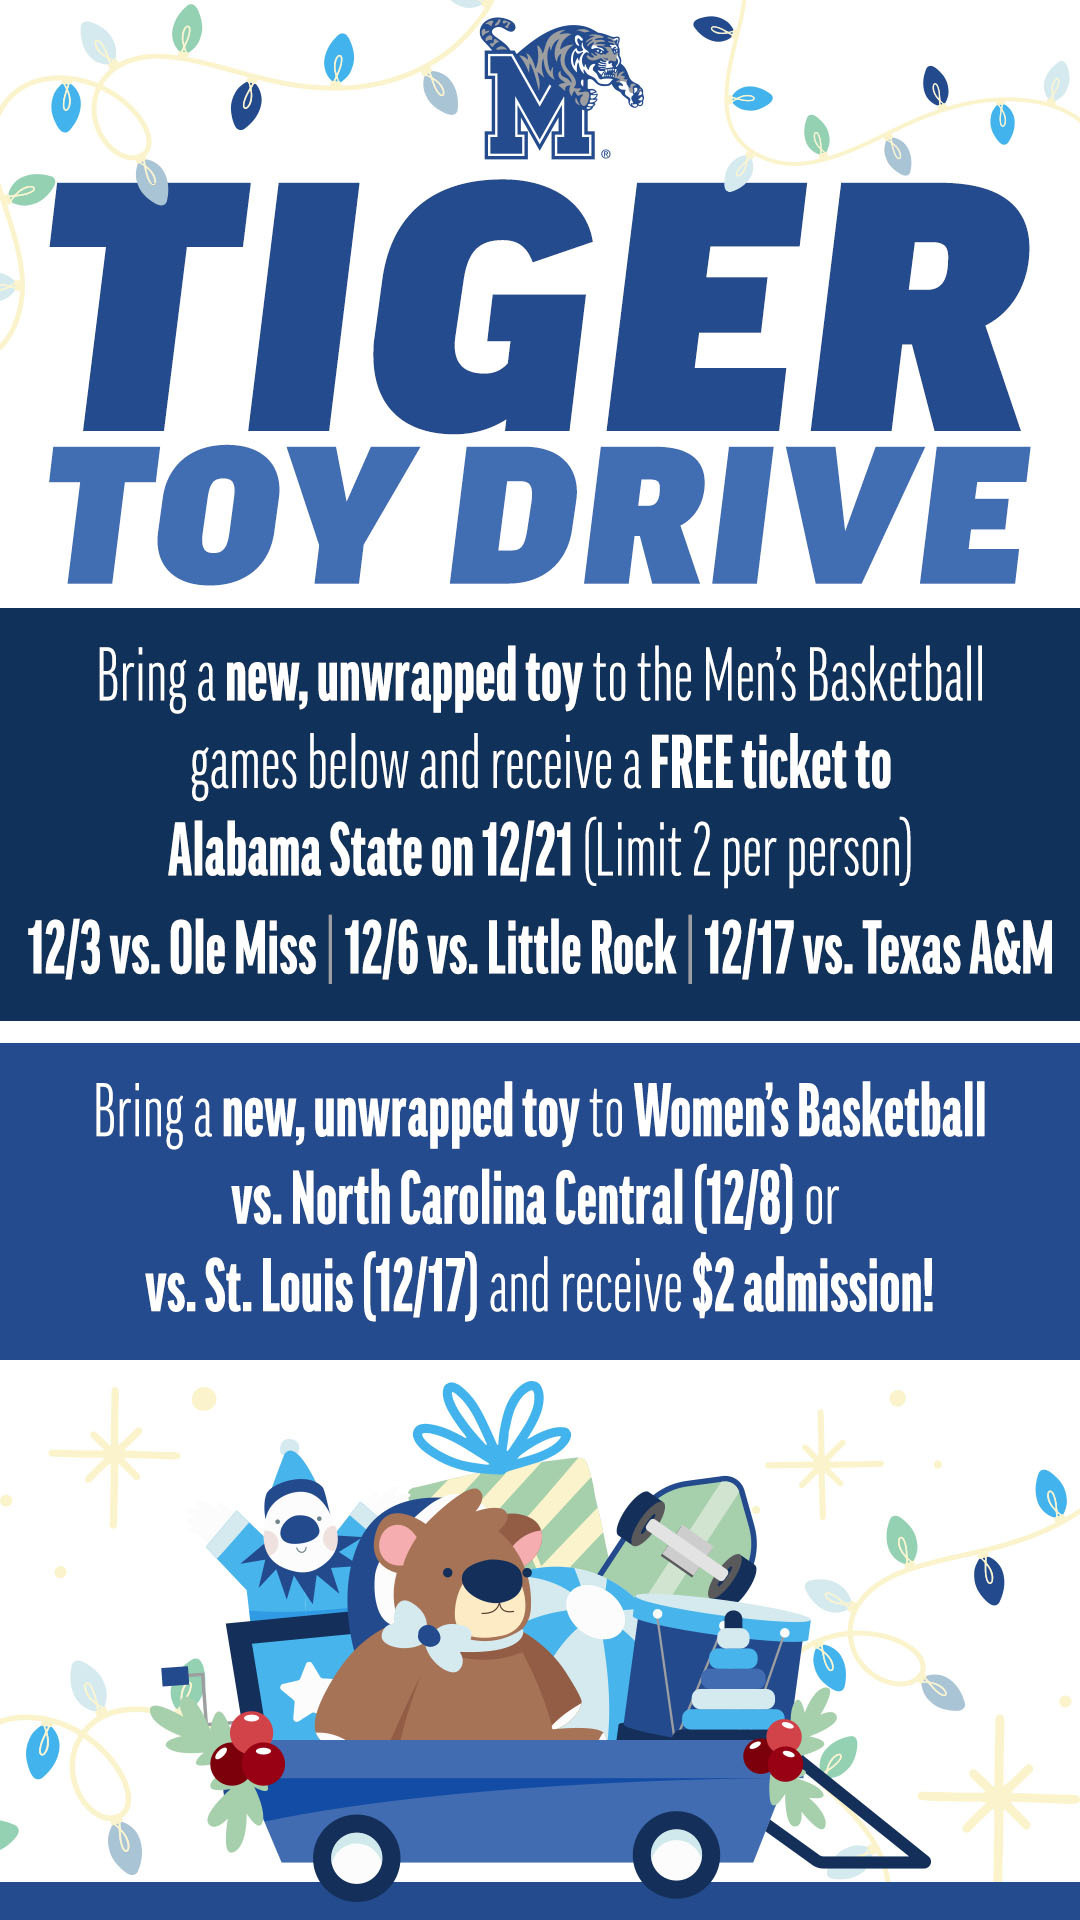 Want Free Tiger Game Tickets? Support Memphis Athletics and the City of